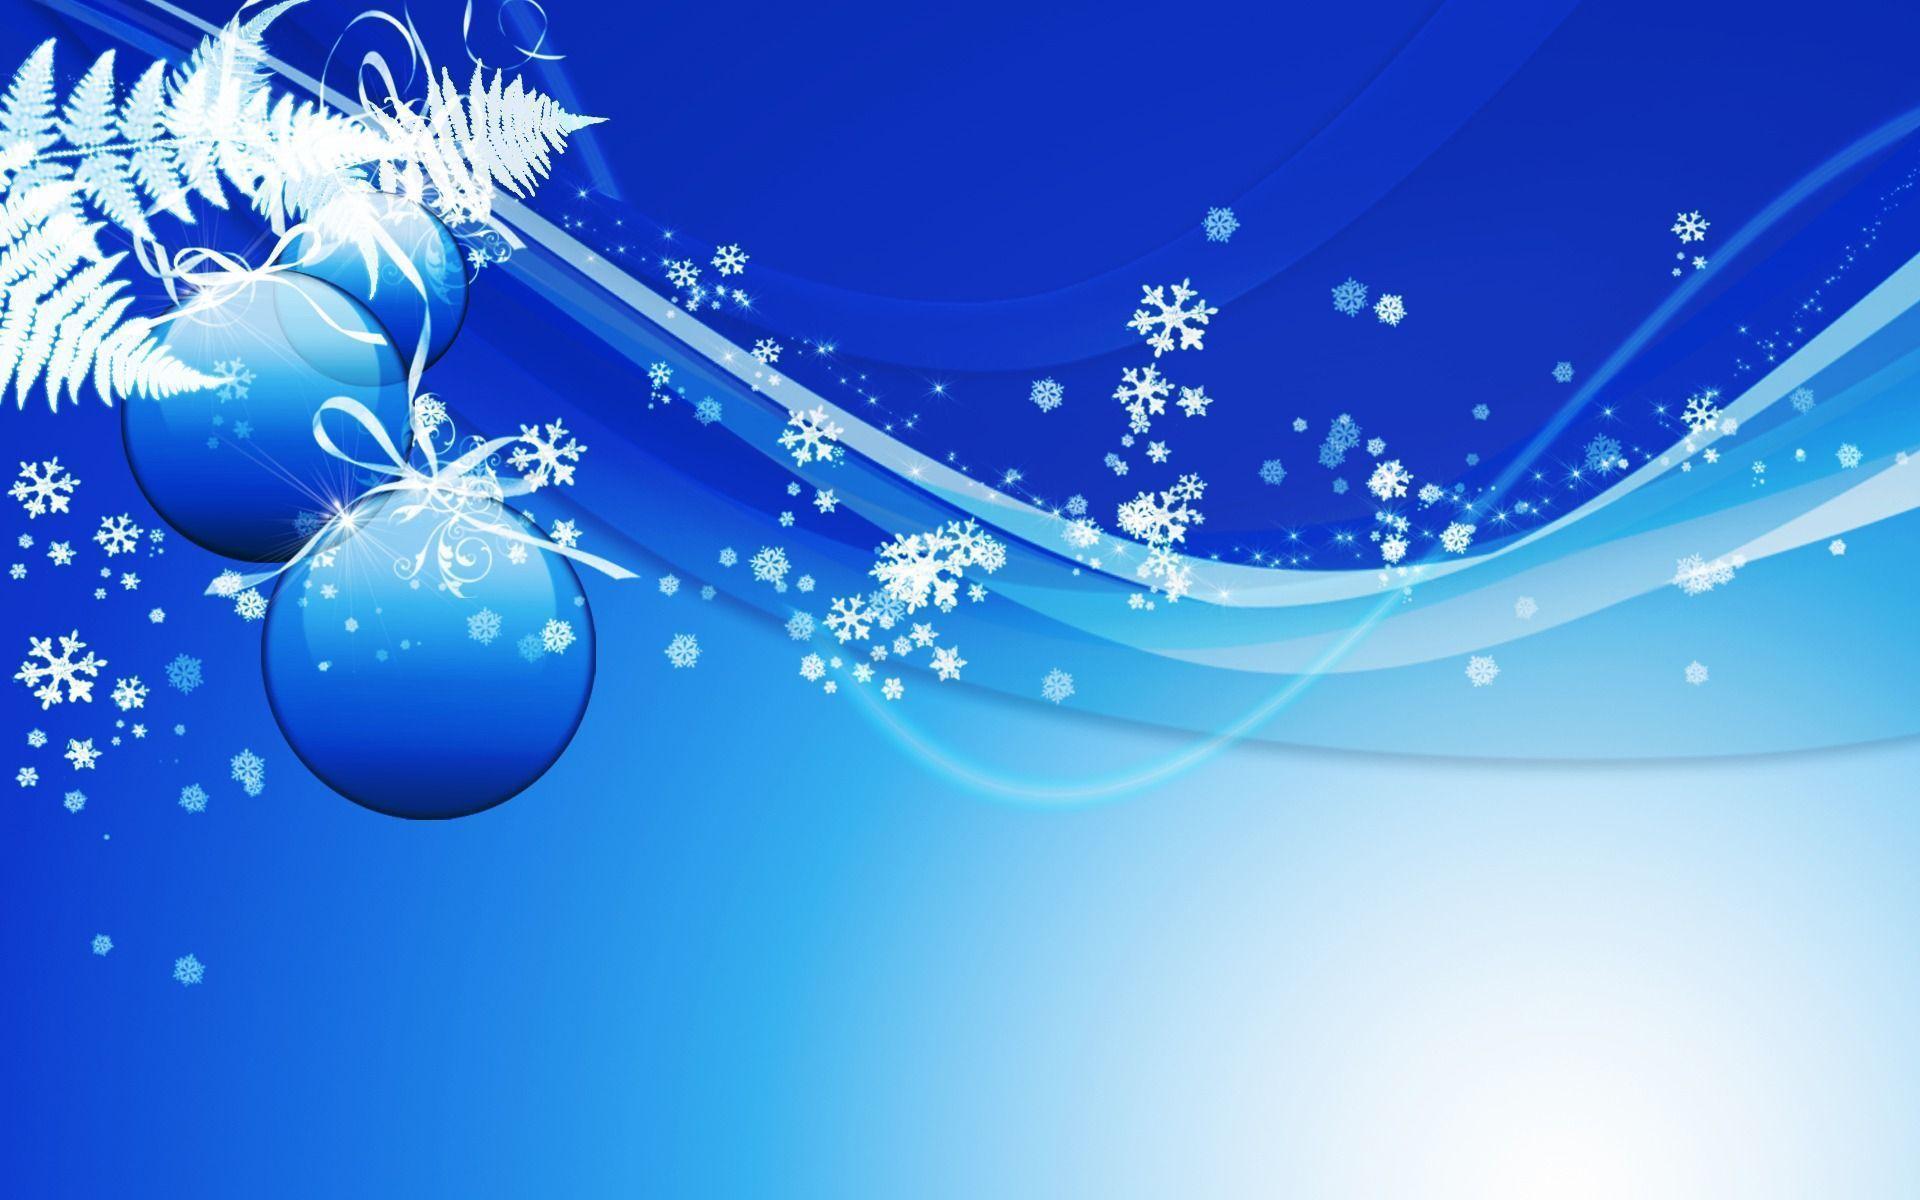 Christmas Wallpaper Background: Wall Paper Background